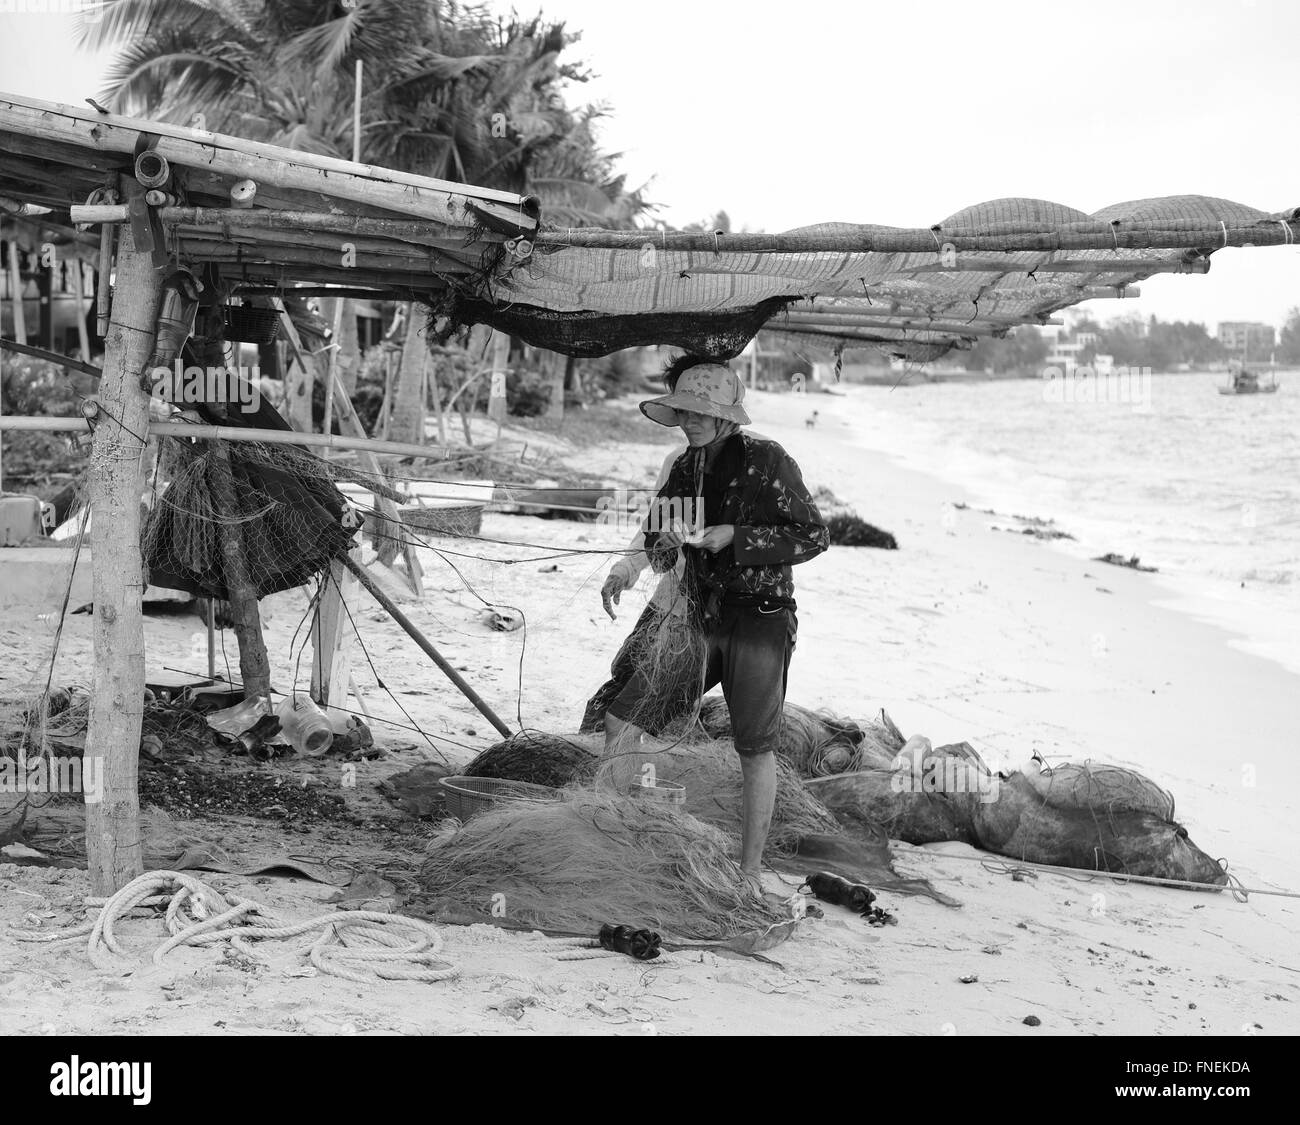 Thailand Black and White Stock Photos & Images - Alamy